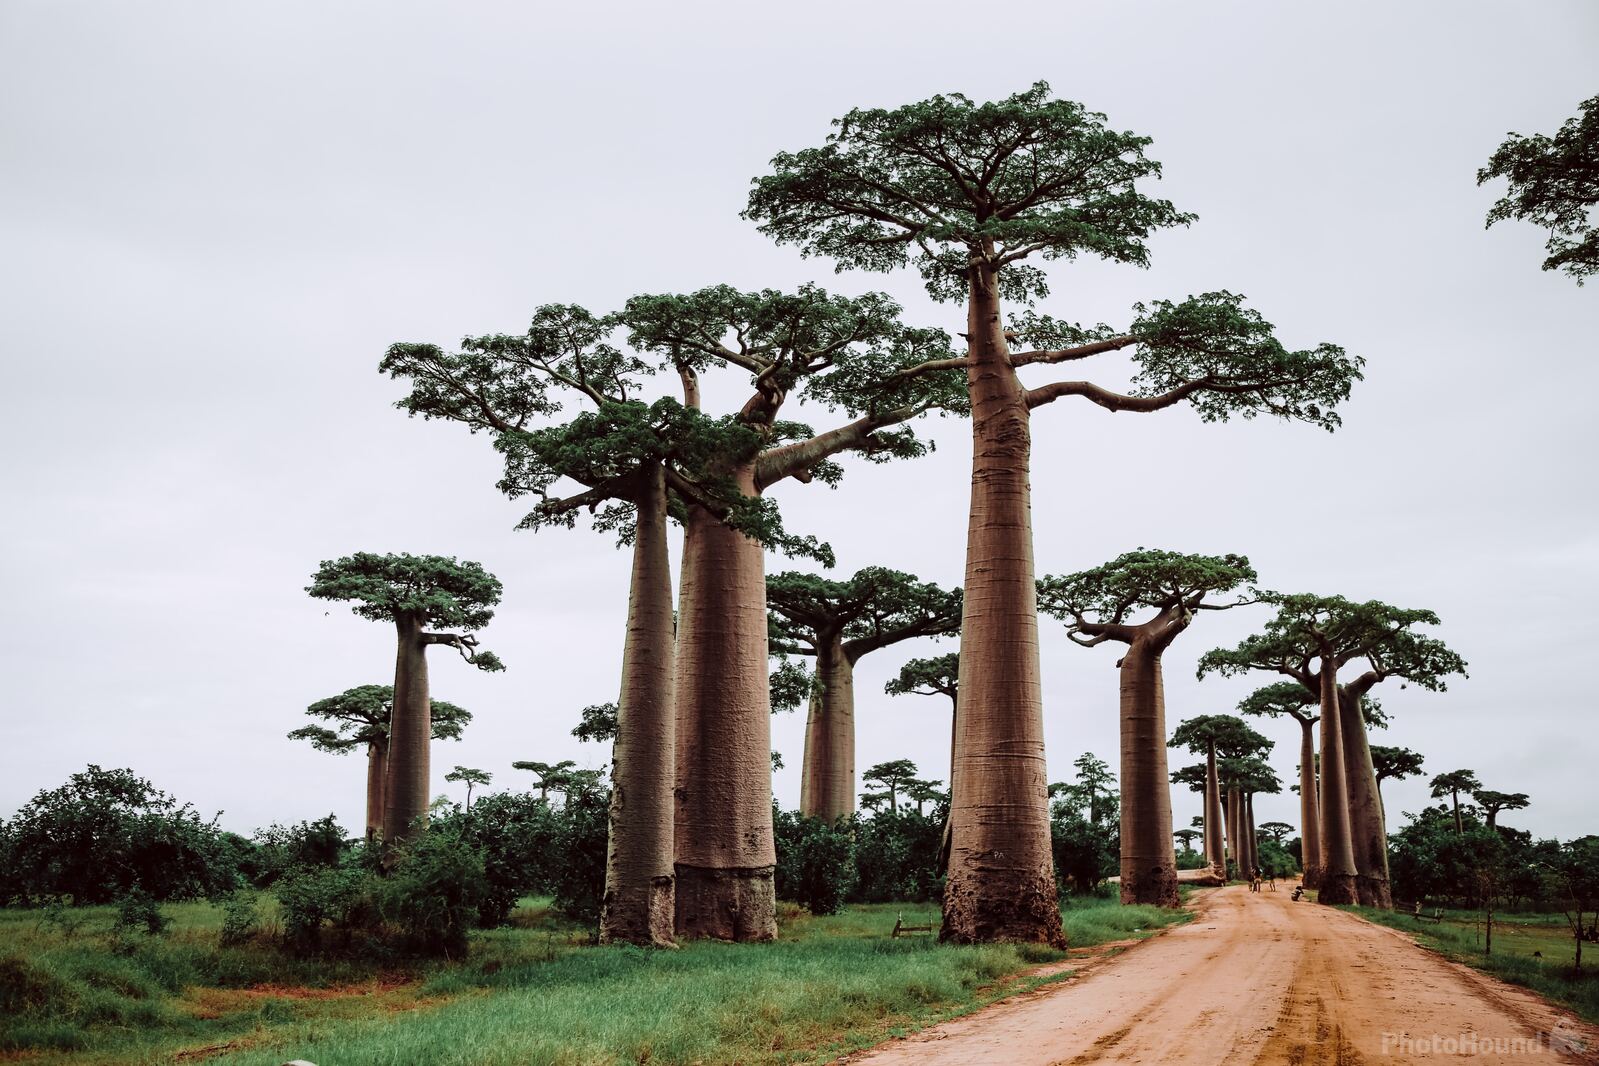 Image of Avenue of the Baobabs in Morondava by Team PhotoHound